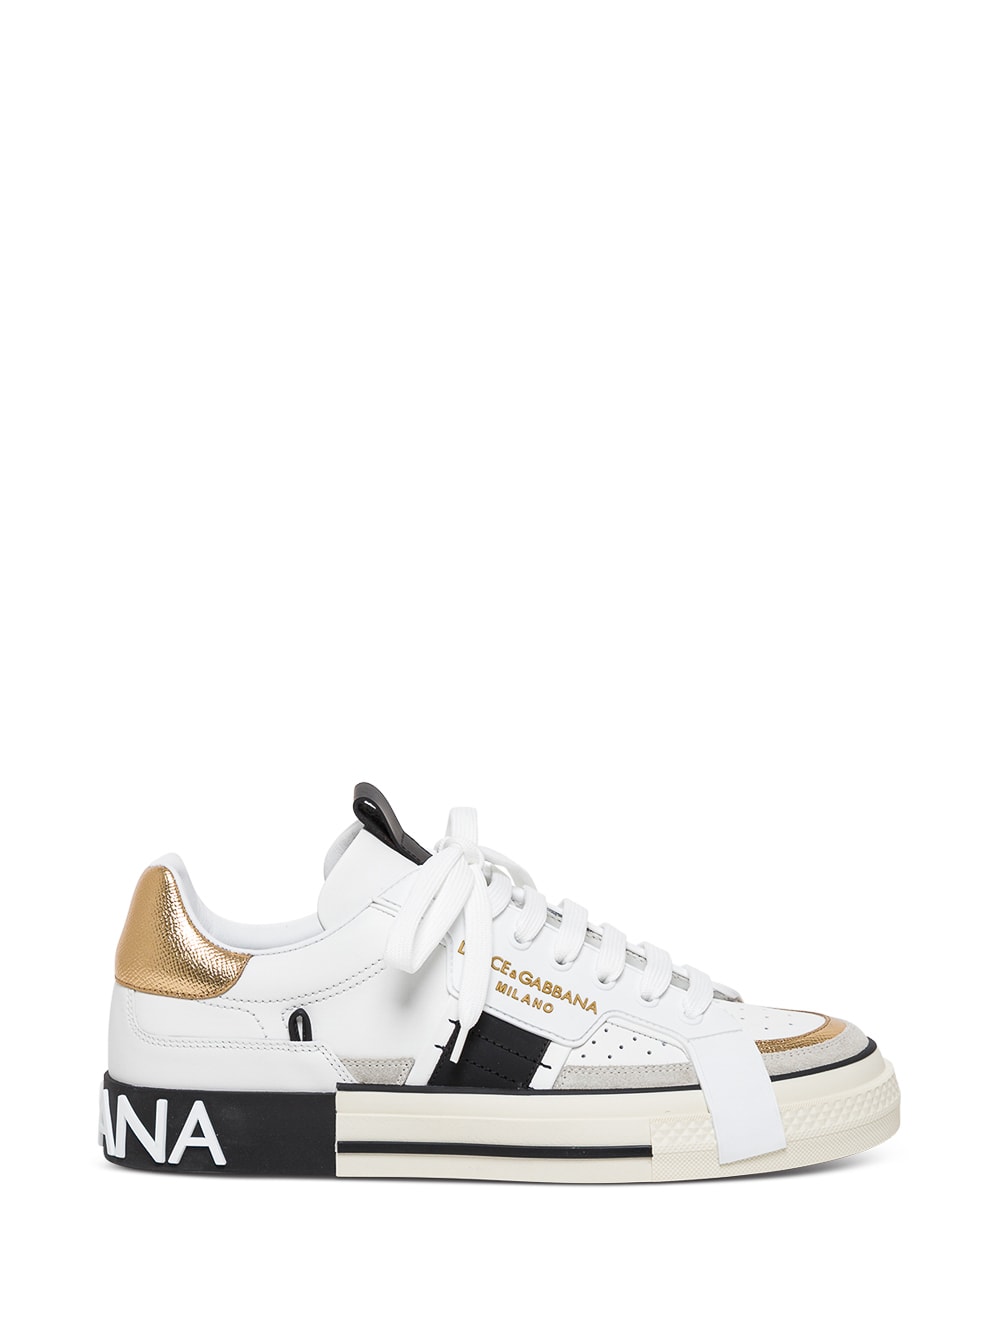 Dolce & Gabbana Custom Leather Sneakers With Metallic Inserts